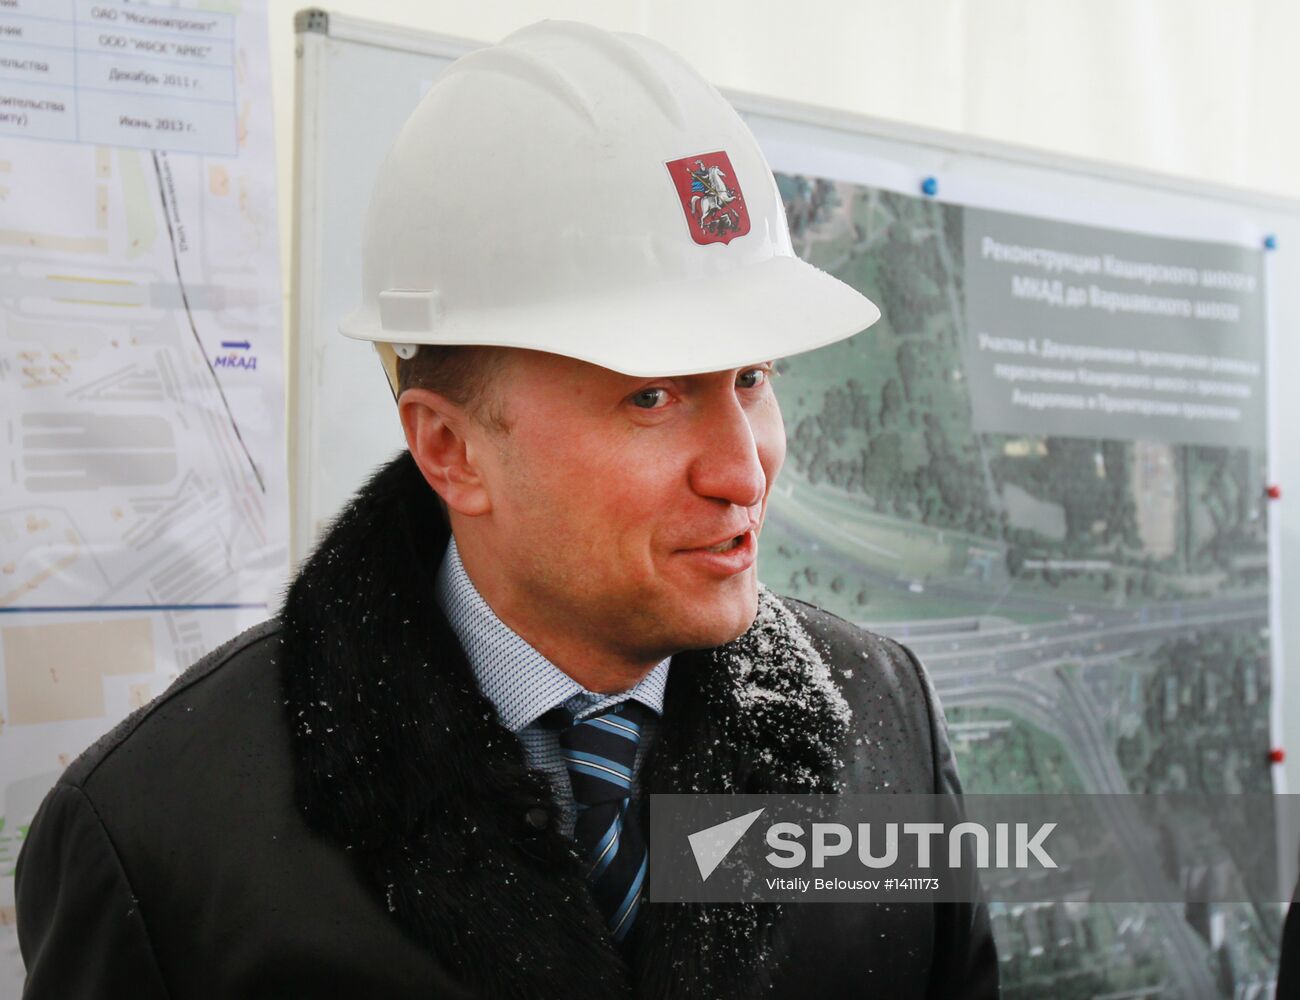 Head of the Moscow Department of Construction Andrei Bochkaryov